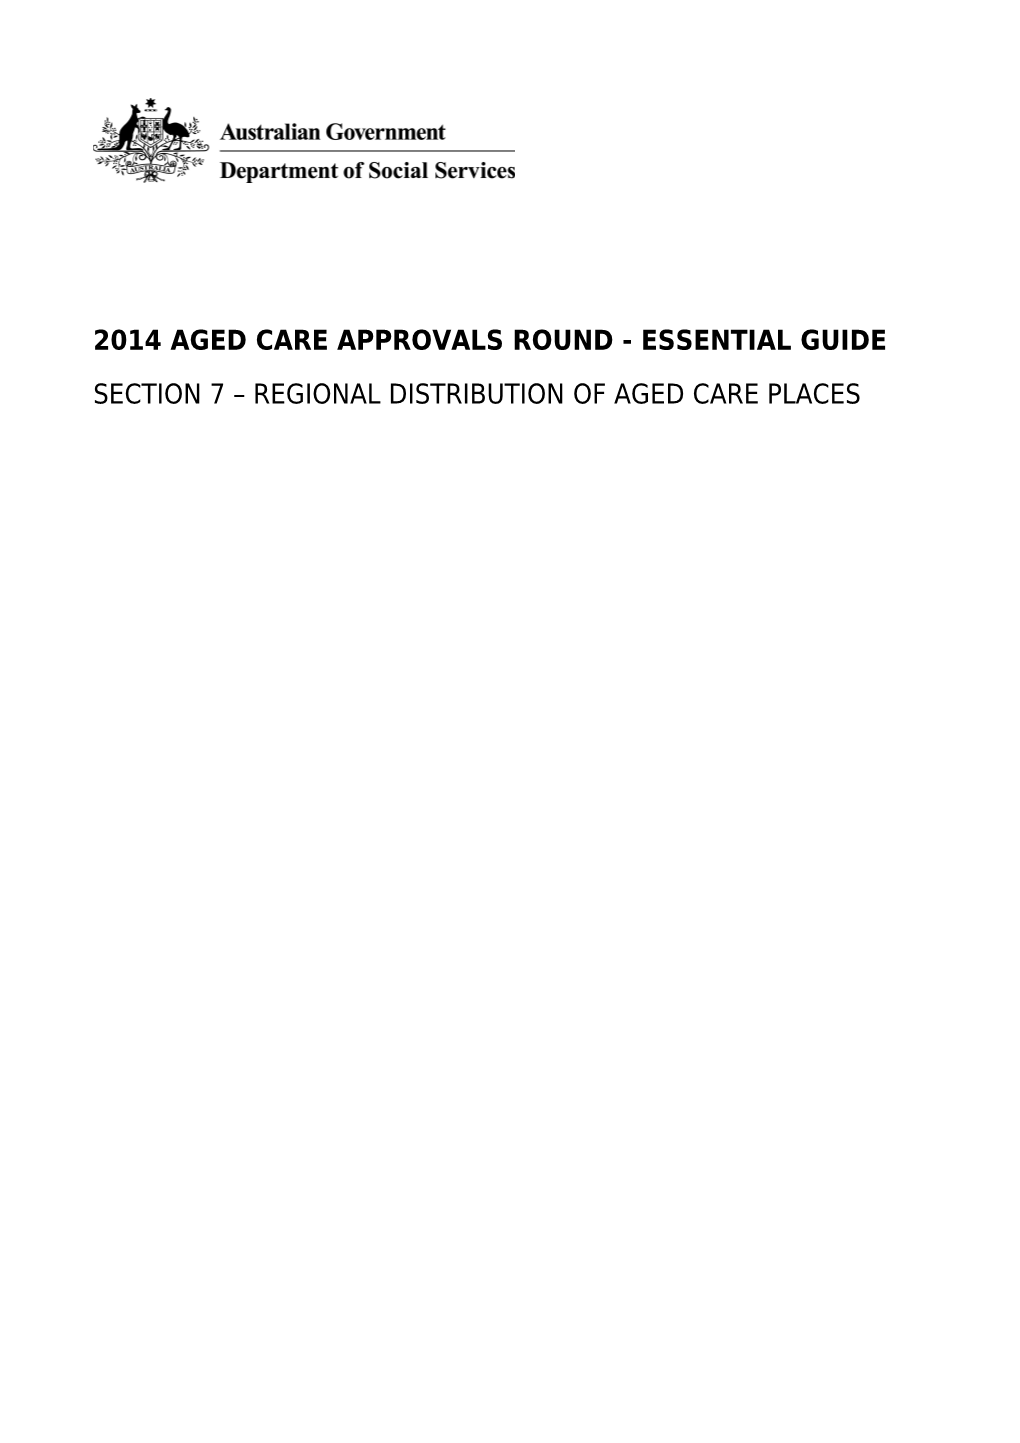 2014 Aged Care Approvals Round - Essential Guide